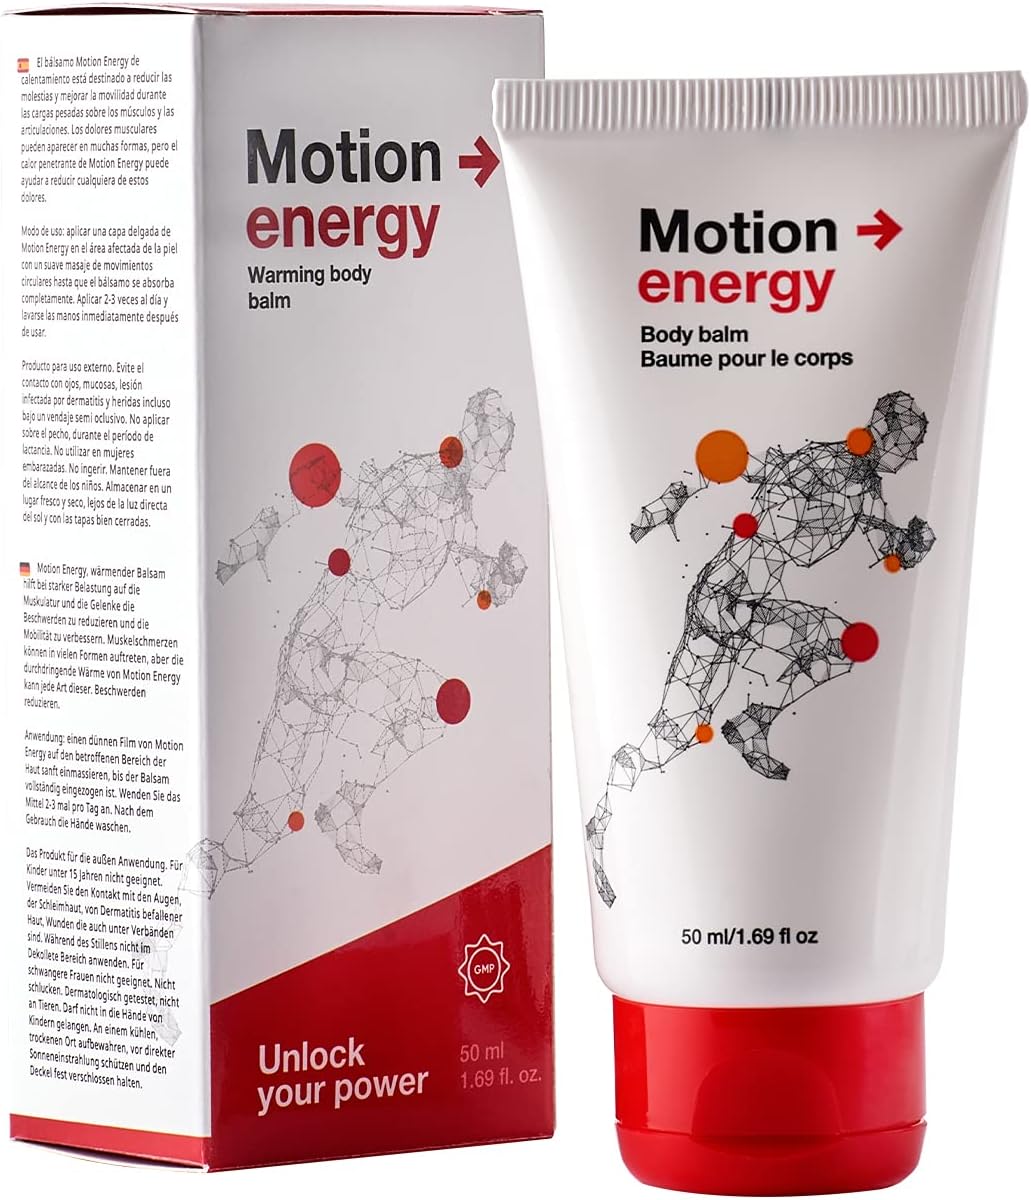 Motion Energy --- Pain reliever
#energy #energysavingtips #Energia #EnergyEfficiency #EnergyTransition #motion #pain #painrelief #painful 
Available for Germany & Austria
Click the link below and get it now:-   sites.google.com/view/motionene…